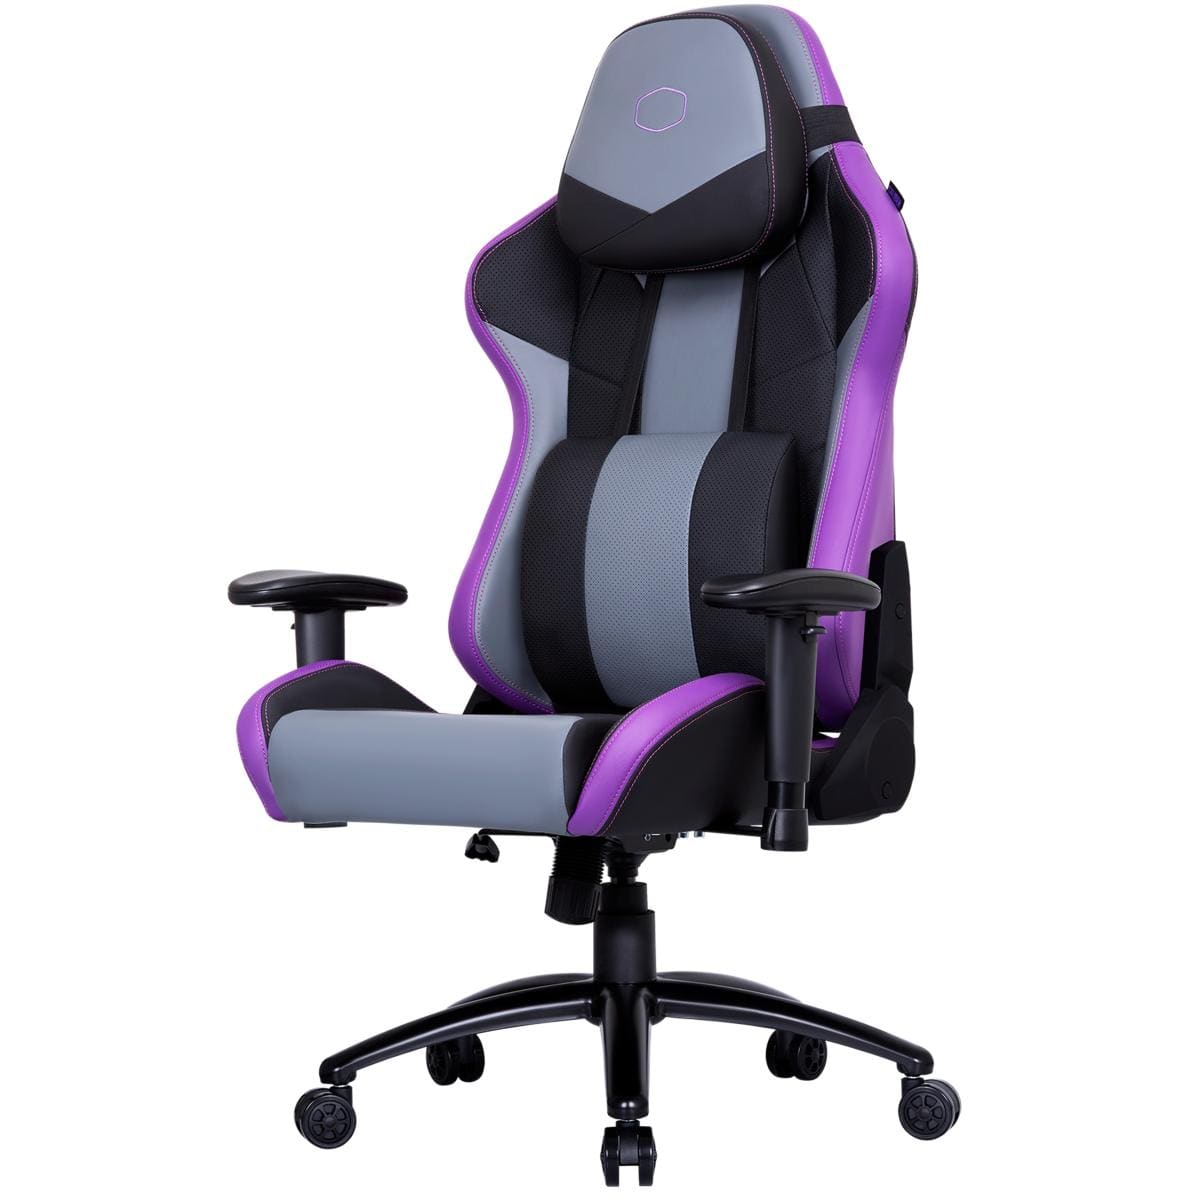 COOLER MASTER Gaming Chairs Cooler Master Caliber R3 Gaming Chair (Purple), Steel Frame, Ultra Comfortable Memory Foam & PU, 2D Armrest, Up To 180° Recline & 150KG Max Weight Load